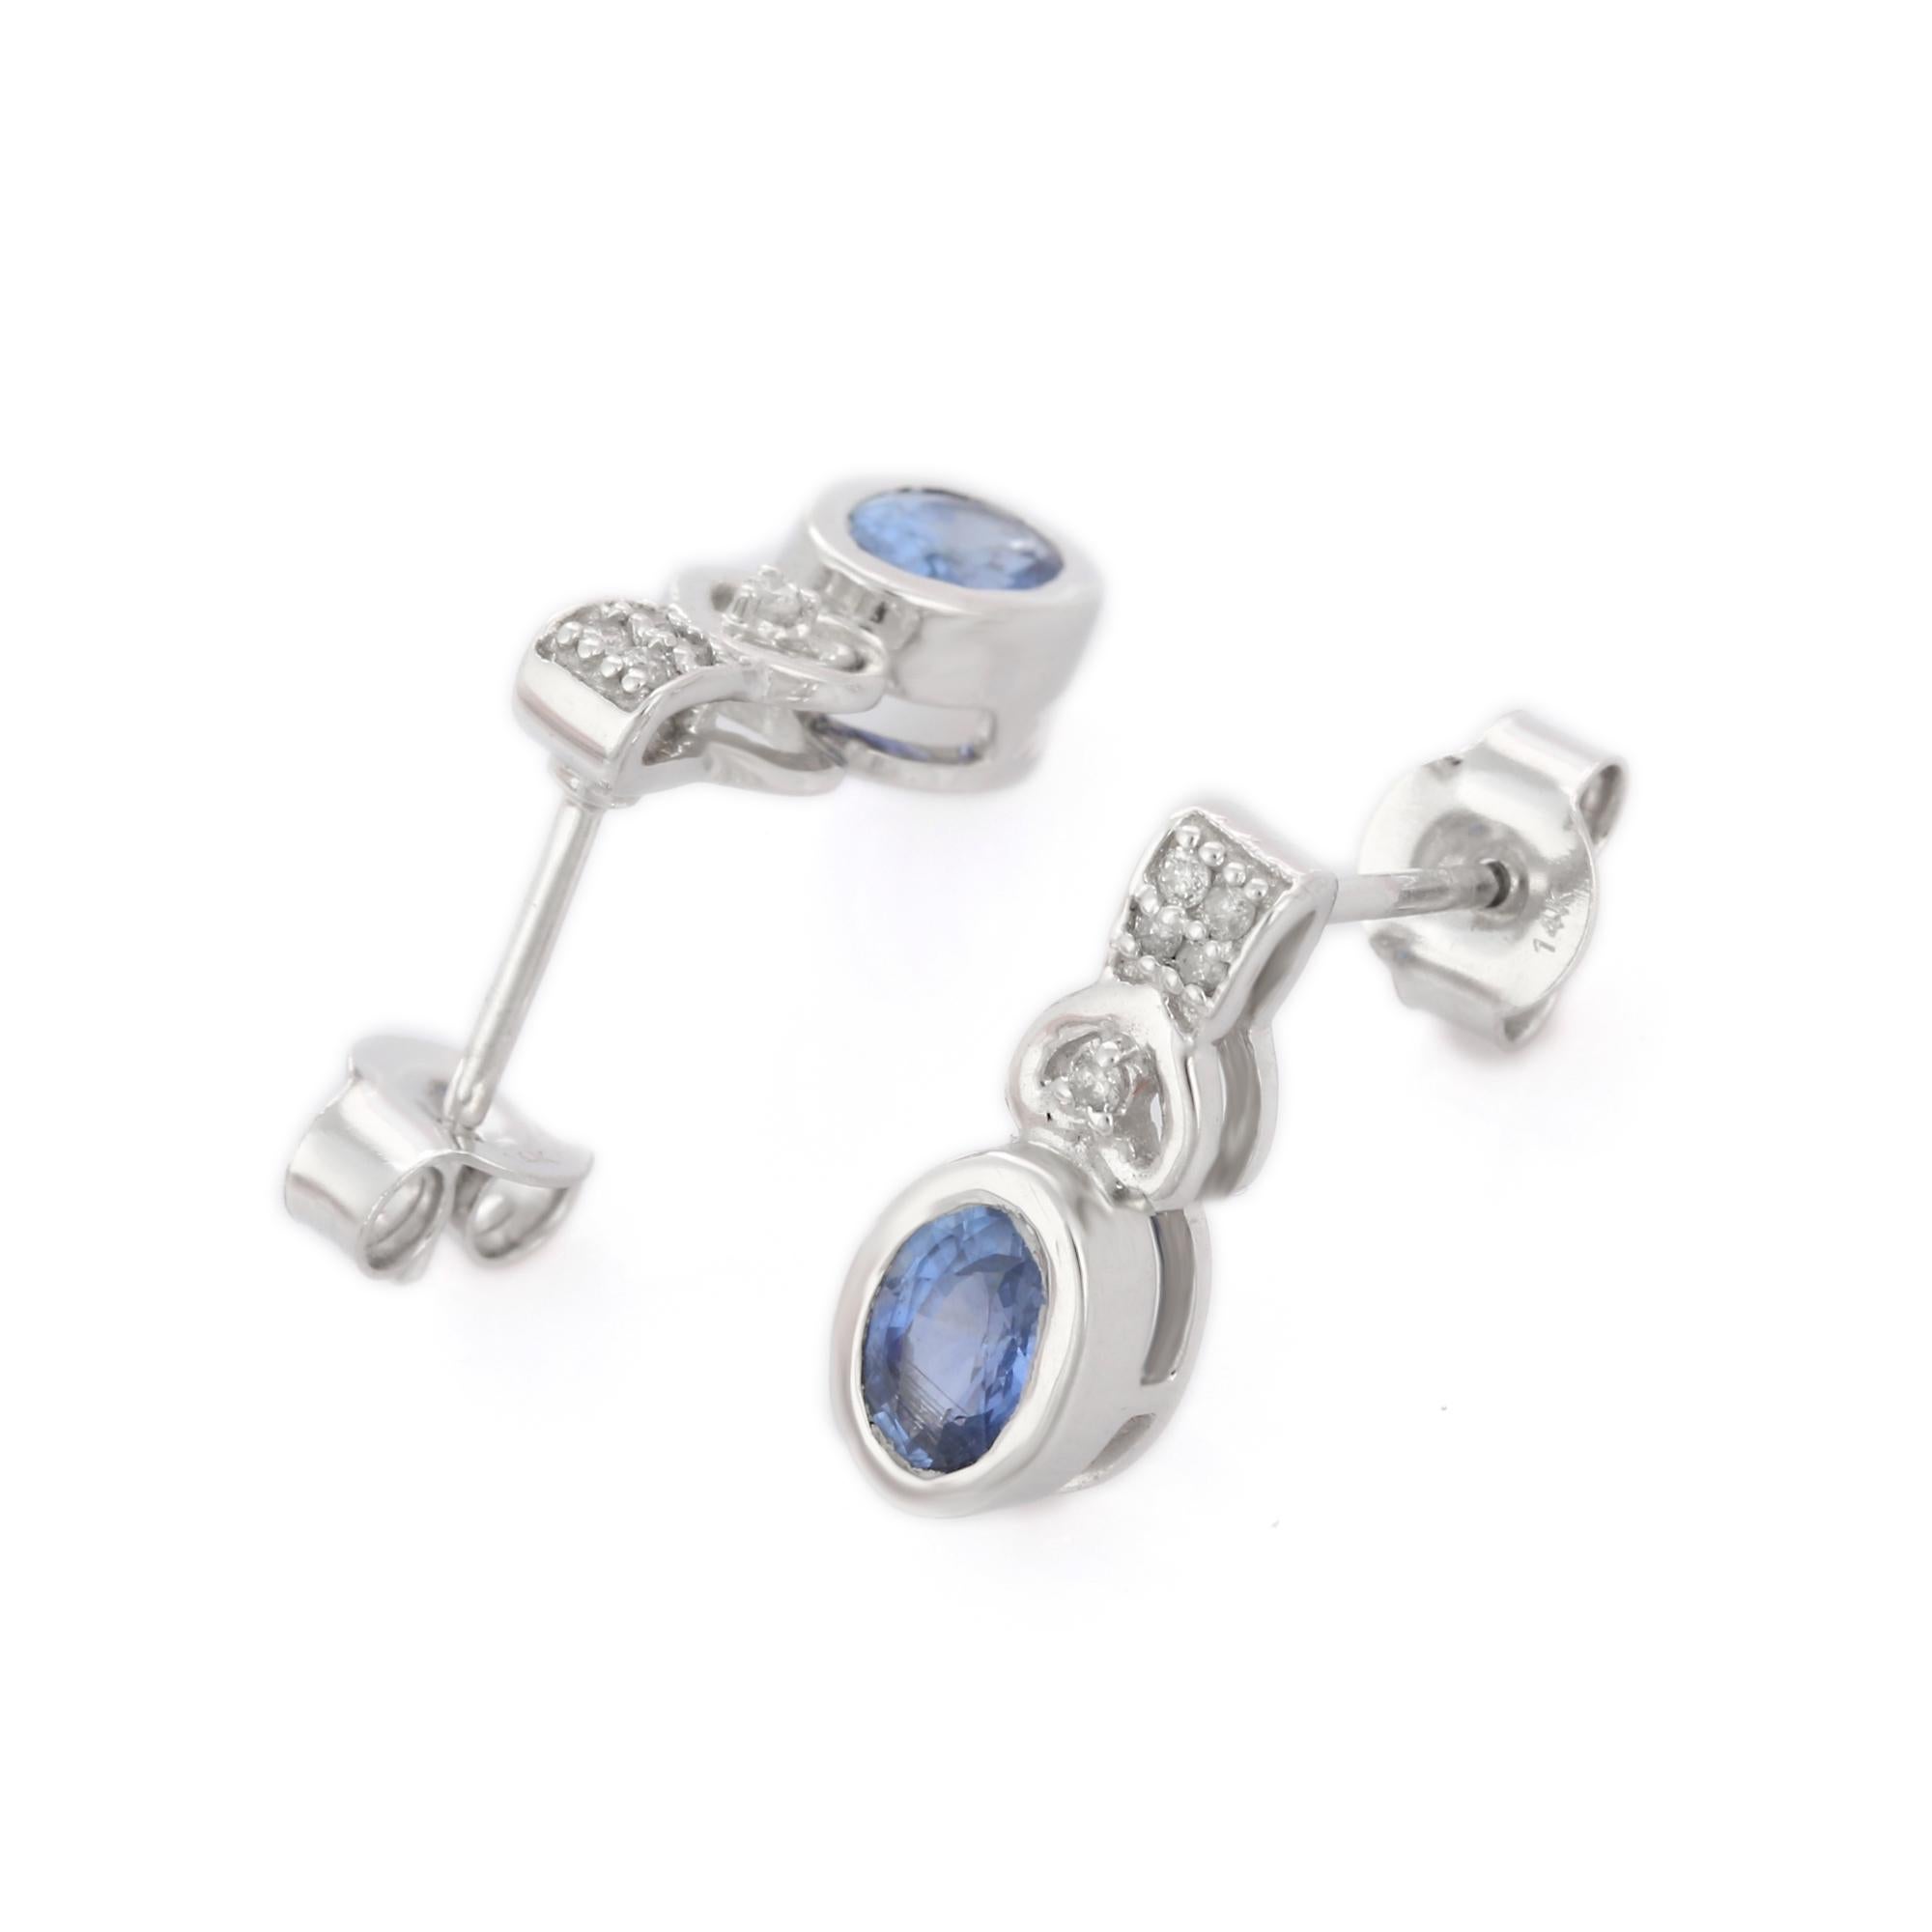 Art Deco 1.21 Carat Blue Sapphire Stud Earrings in 14K White Gold with Diamonds  For Sale